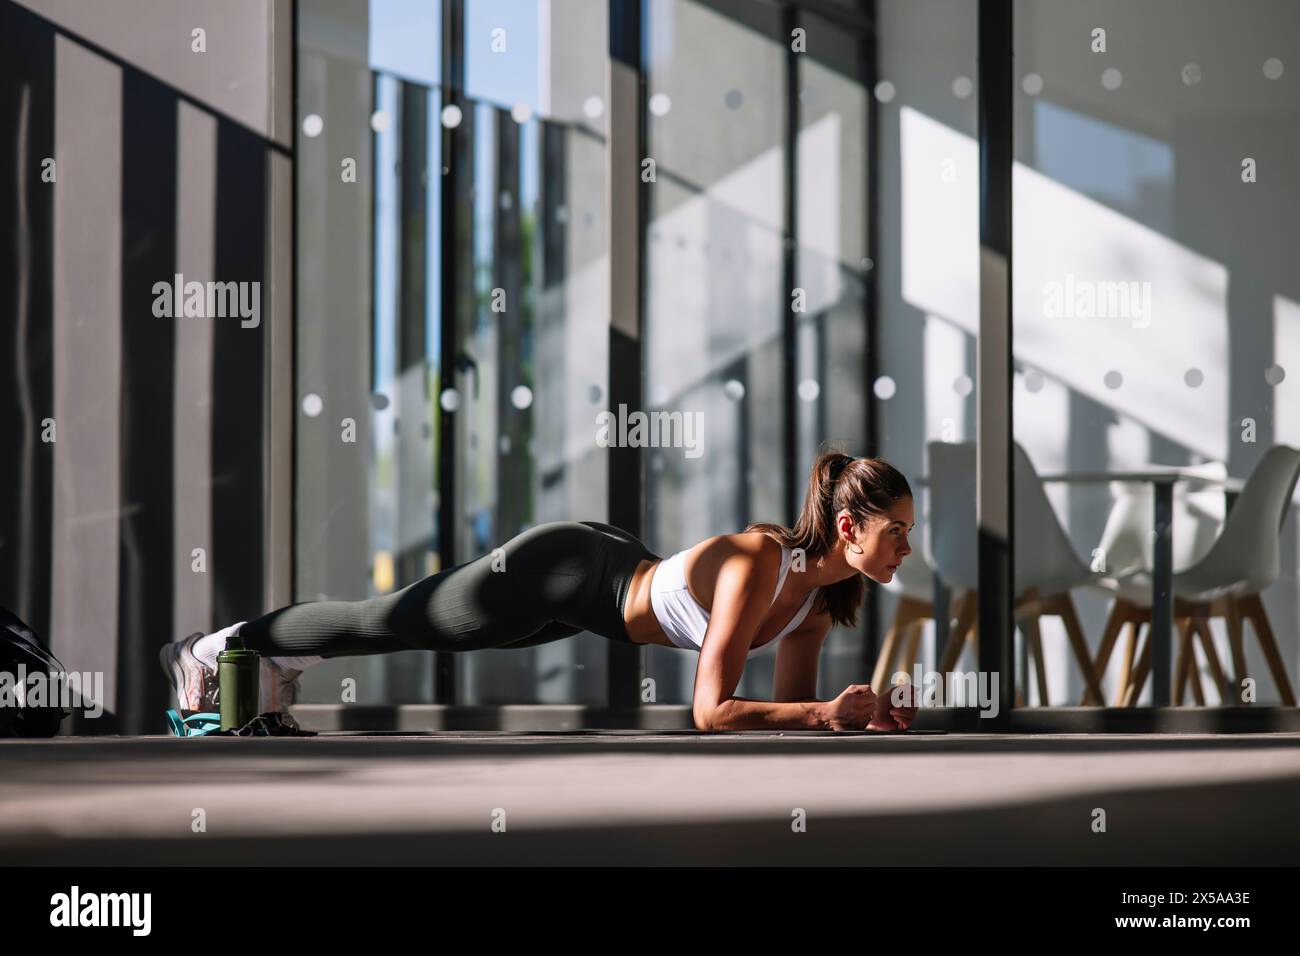 A fit young woman is doing a plank exercise in a brightly lit home environment with modern decor Stock Photo